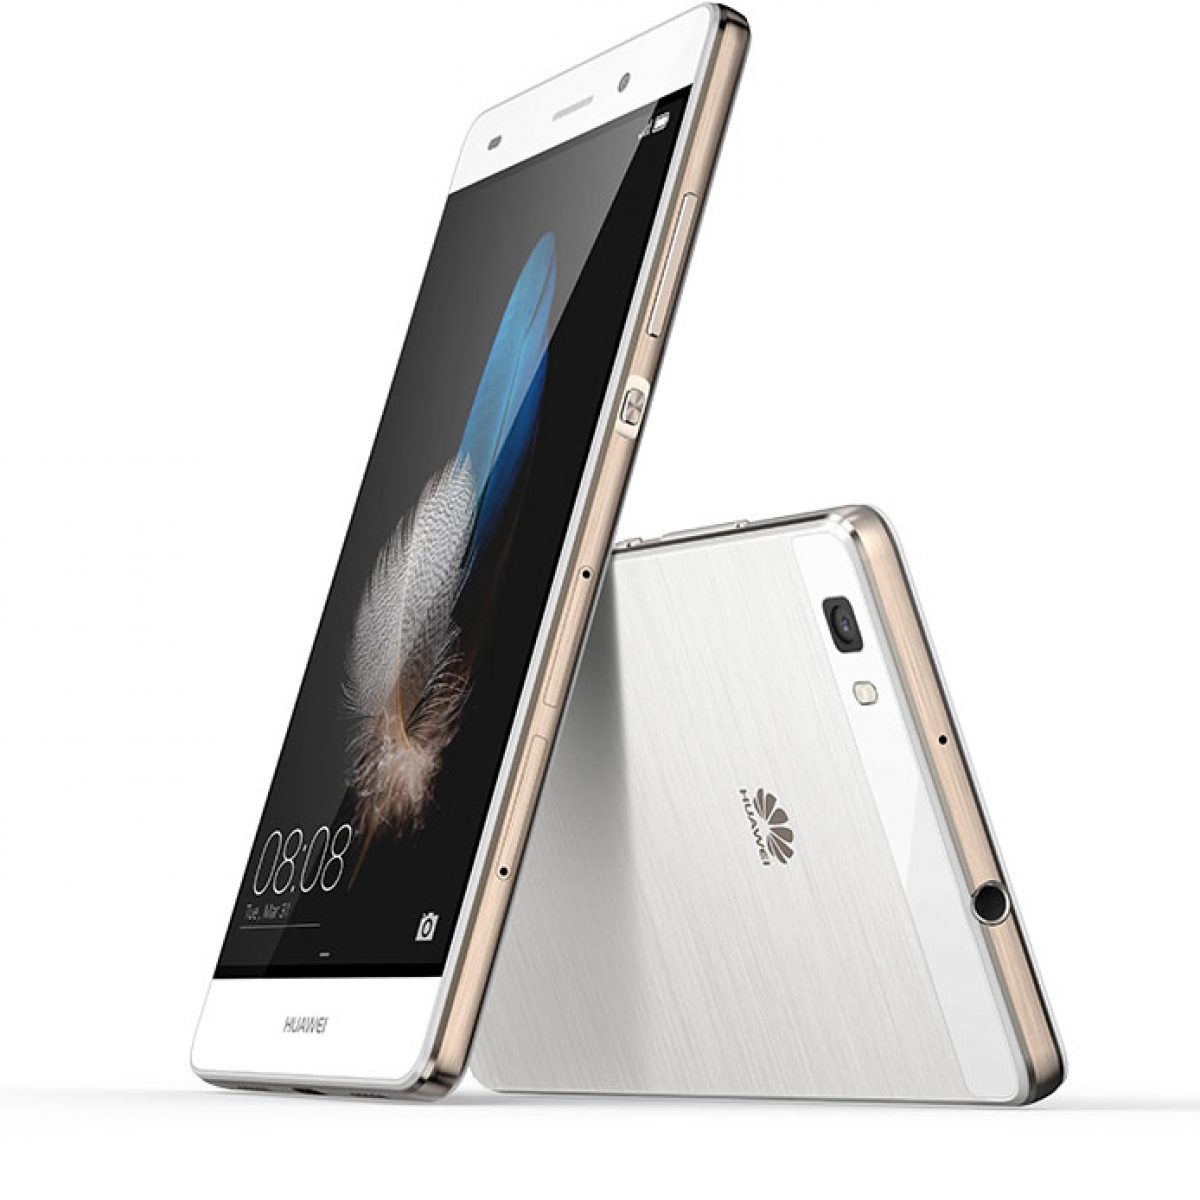 Paradoja Rosa Detector Huawei Announces the P8 Lite, a $249 Unlocked Phone for the US